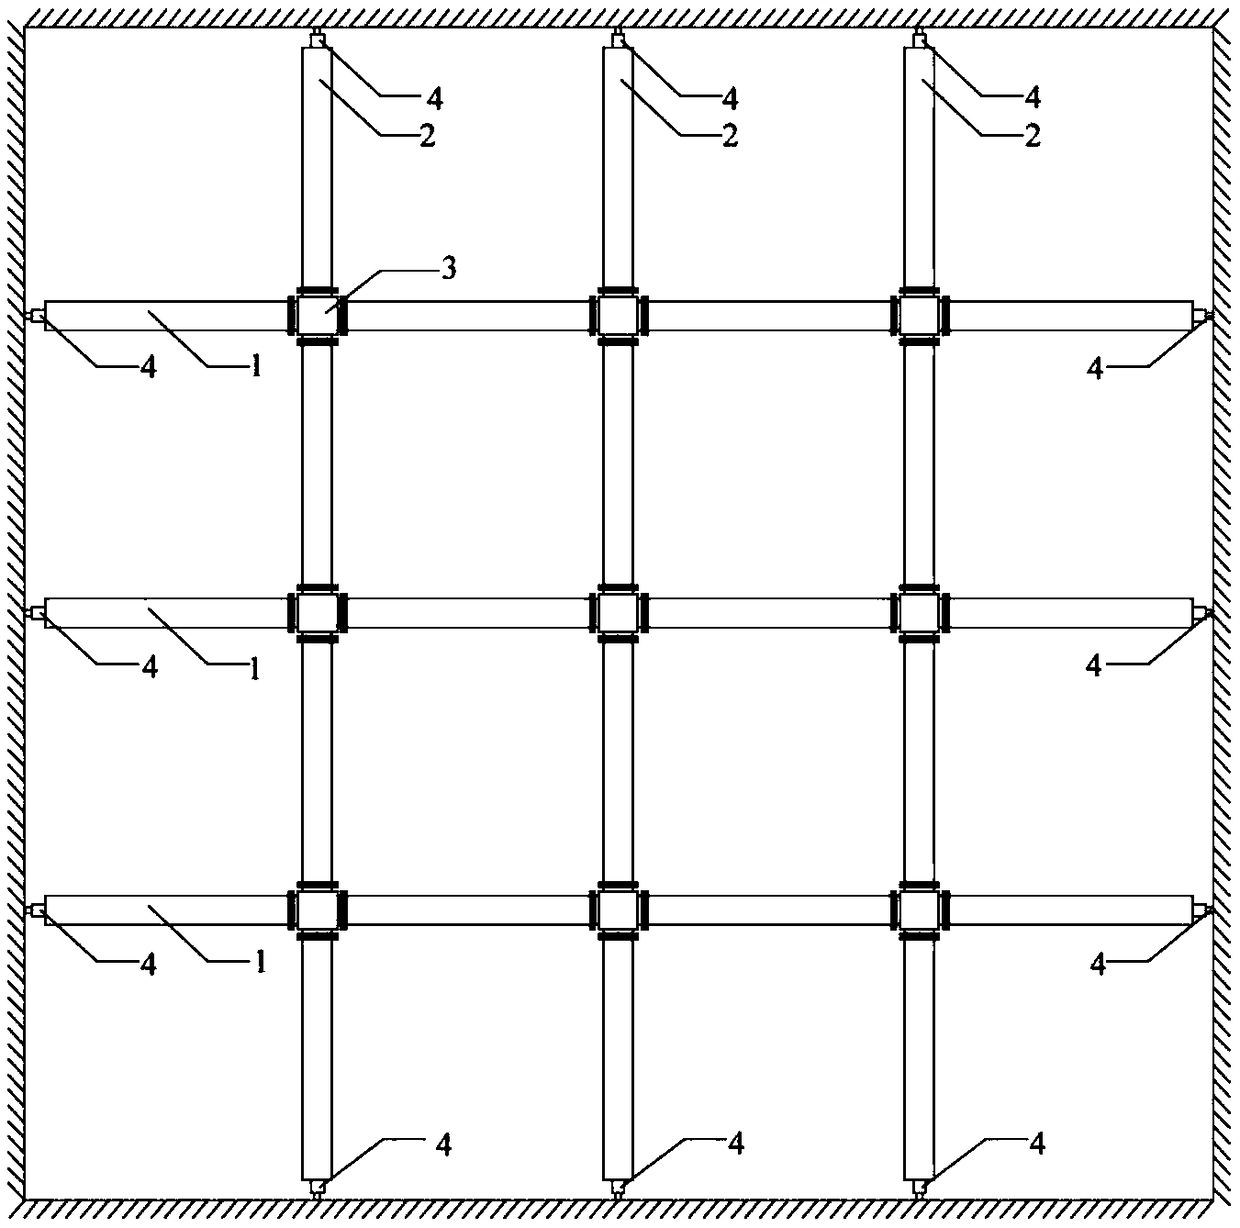 A dynamic control system and dynamic control method for a two-way steel support structure